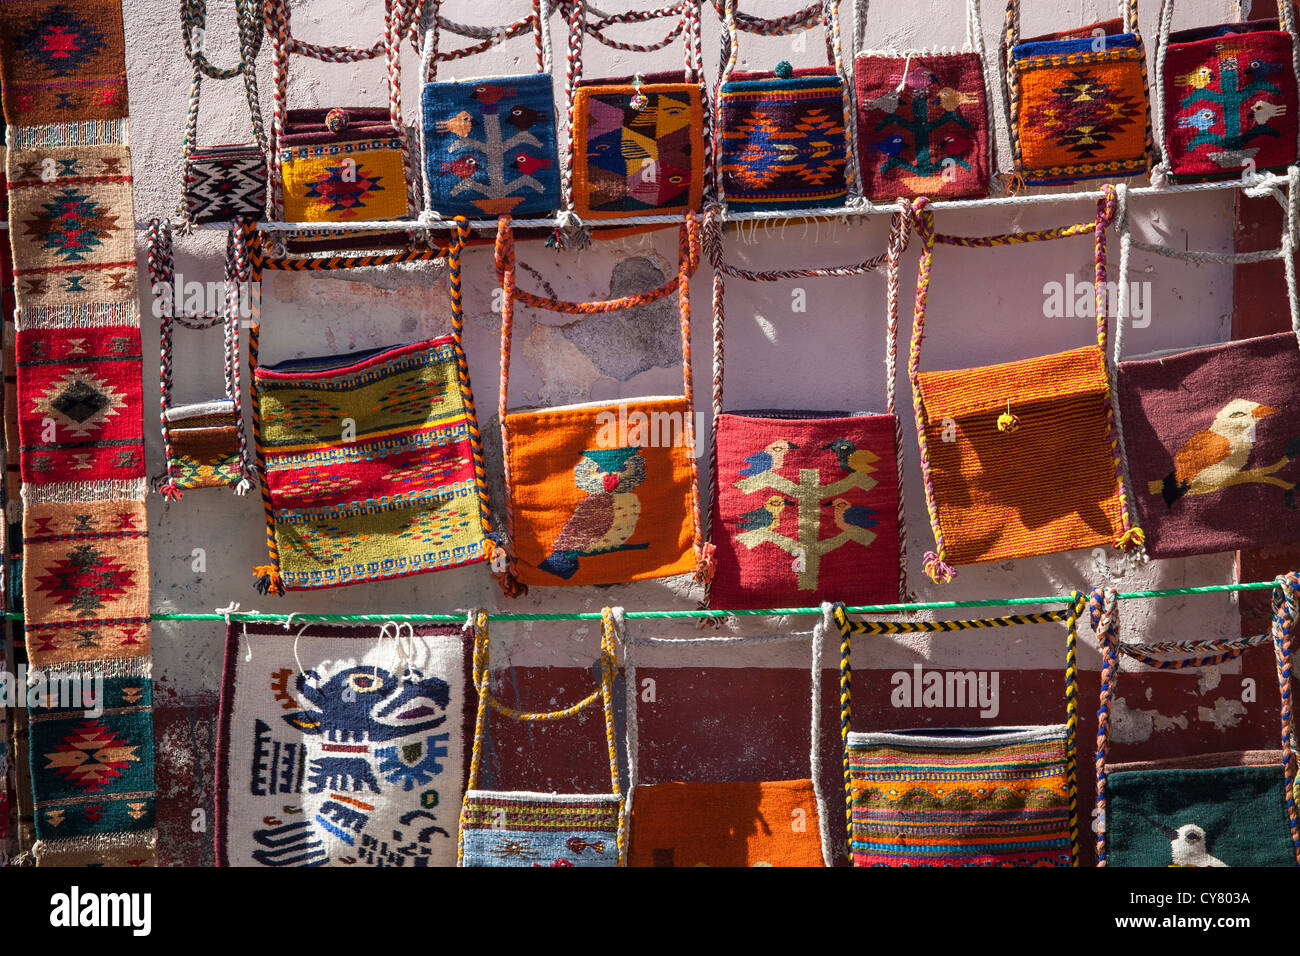 Woven purses made of wool on sale at a street market in Teotitlan, Oaxaca, Mexico. Stock Photo